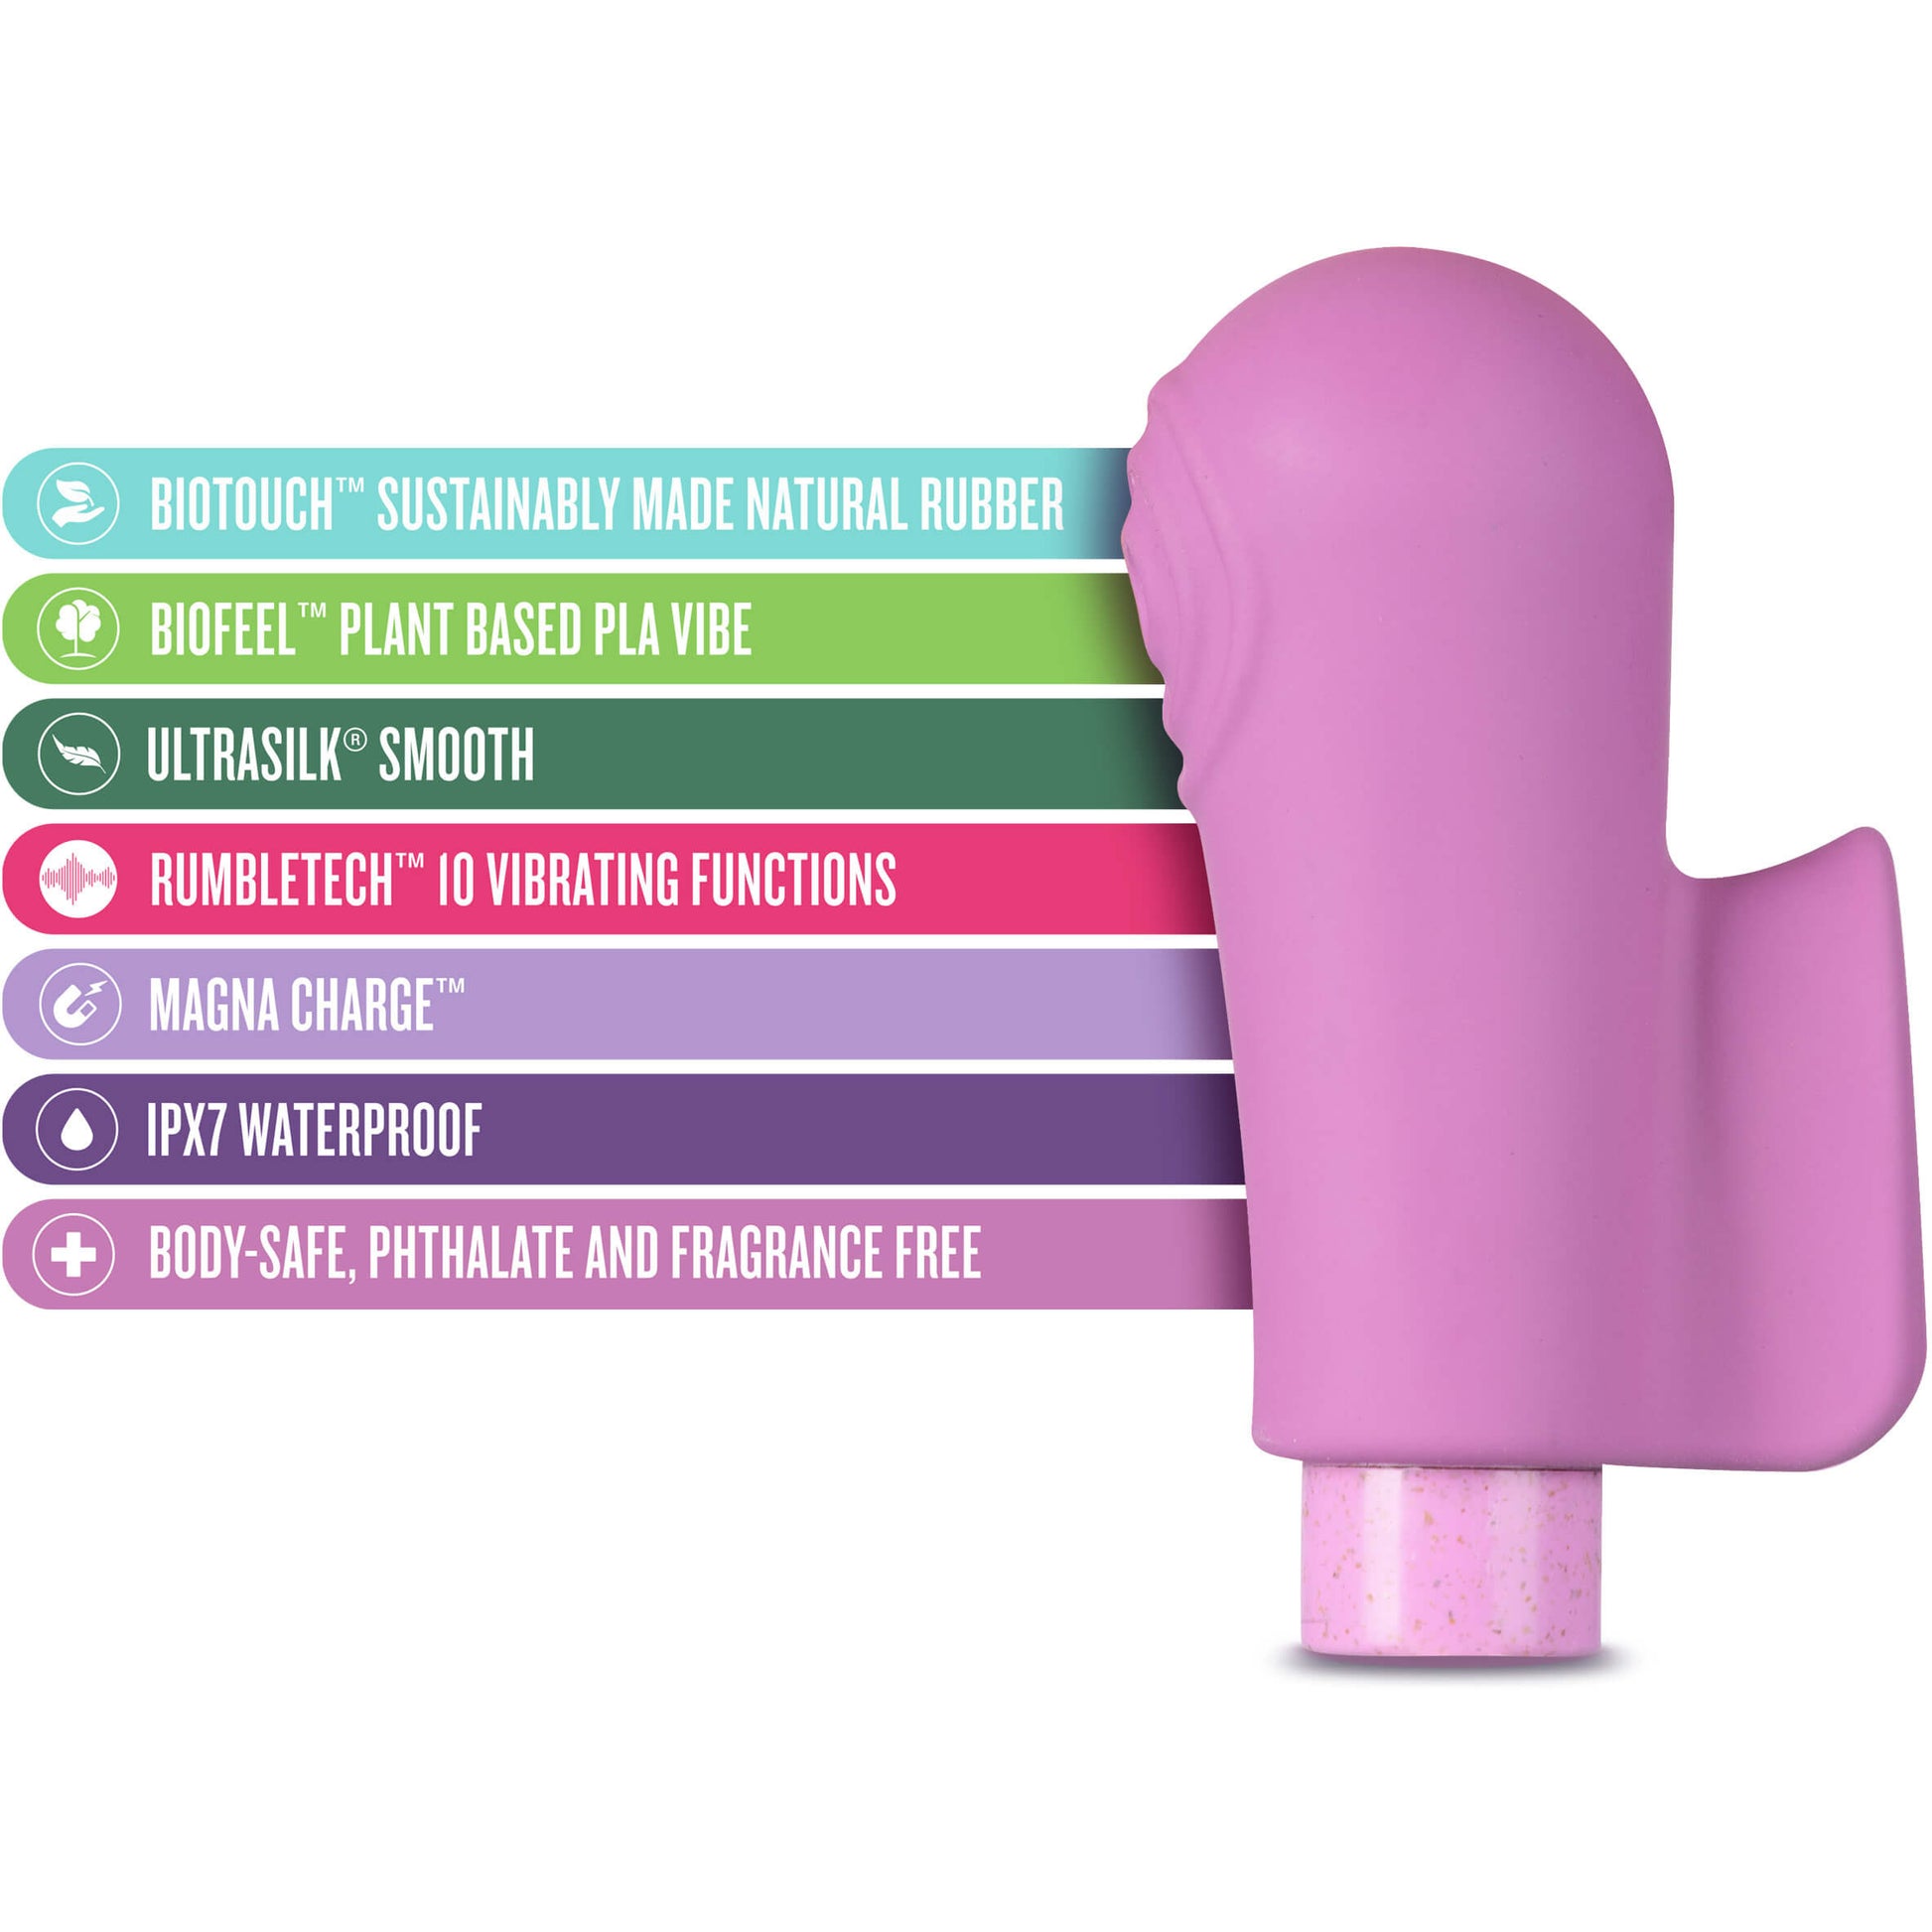 Blush Gaia Eco Delight - by The Bigger O online sex toy shop. USA, Canada, UK shipping available.